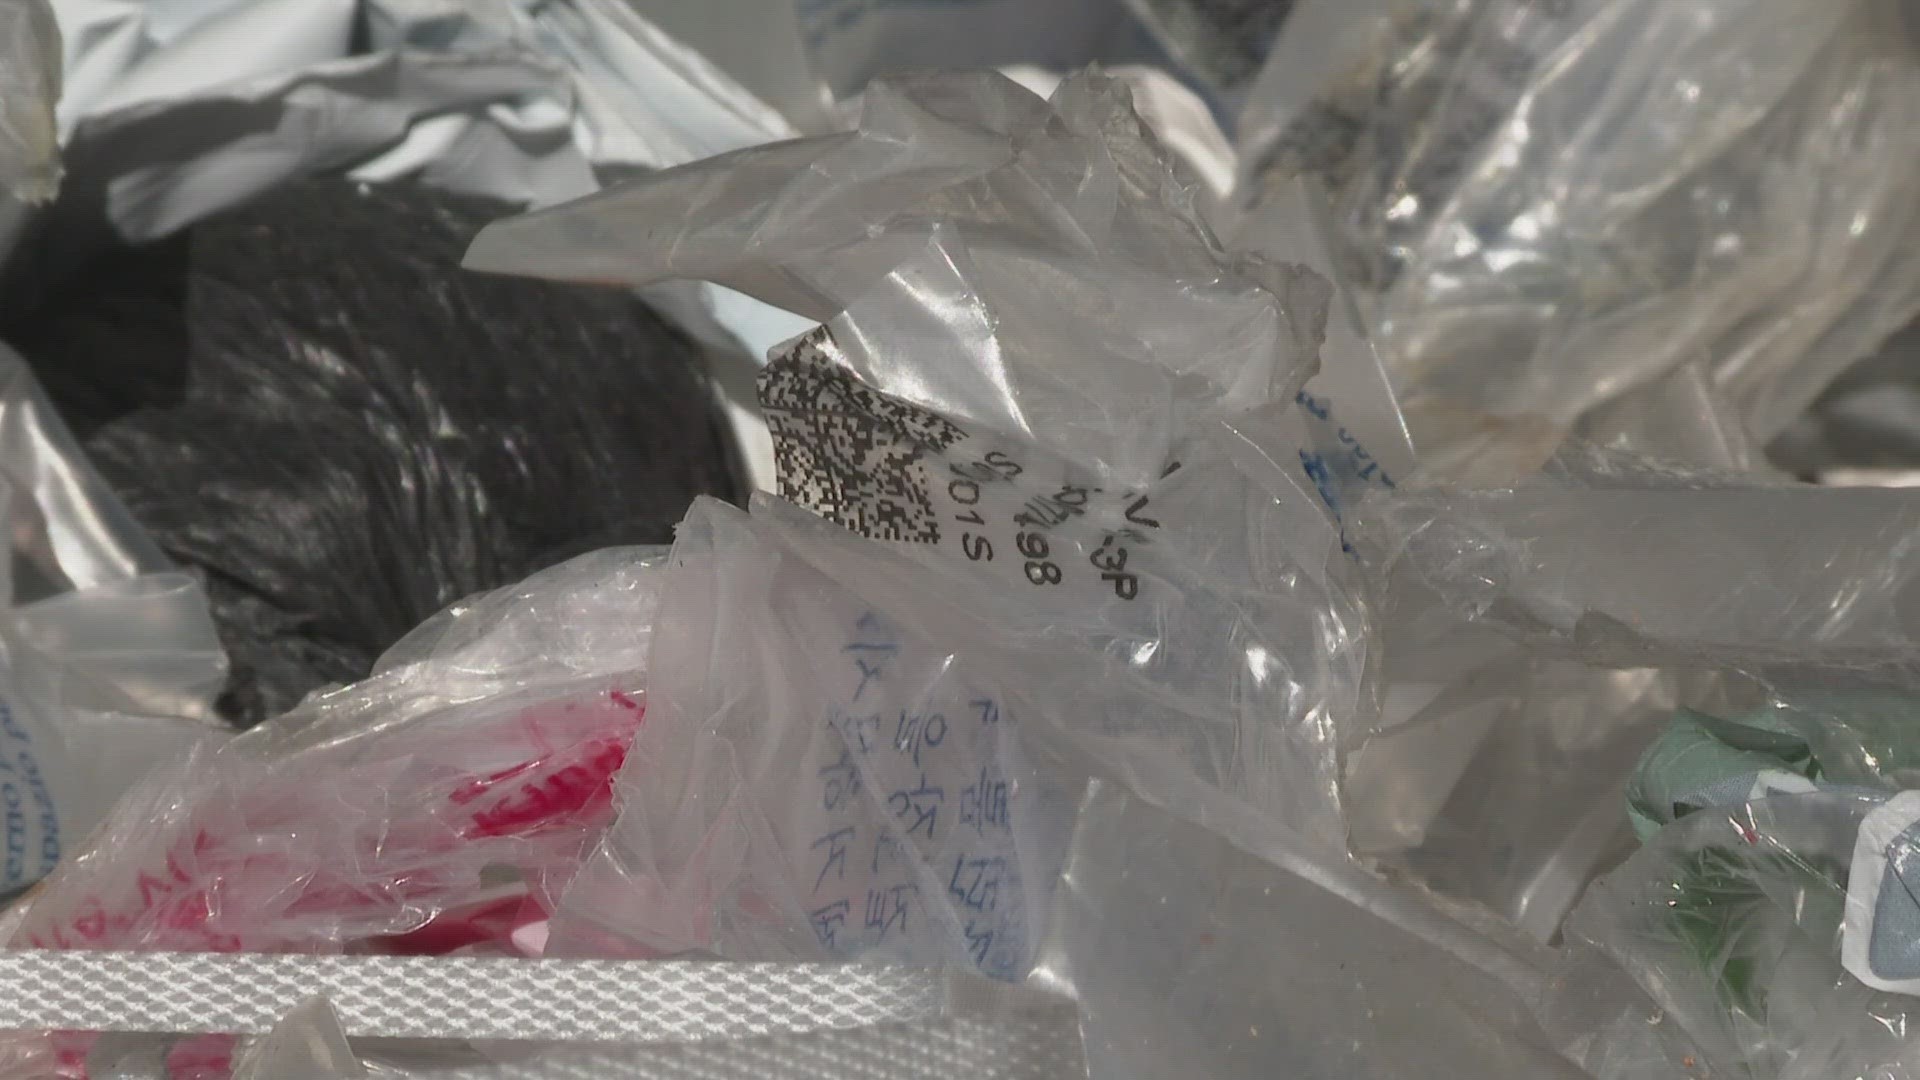 According to estimates from a recycling center nonprofit in Boulder, between 1.5 billion and 1.8 billion fewer plastic bags were used in Colorado in 2023.